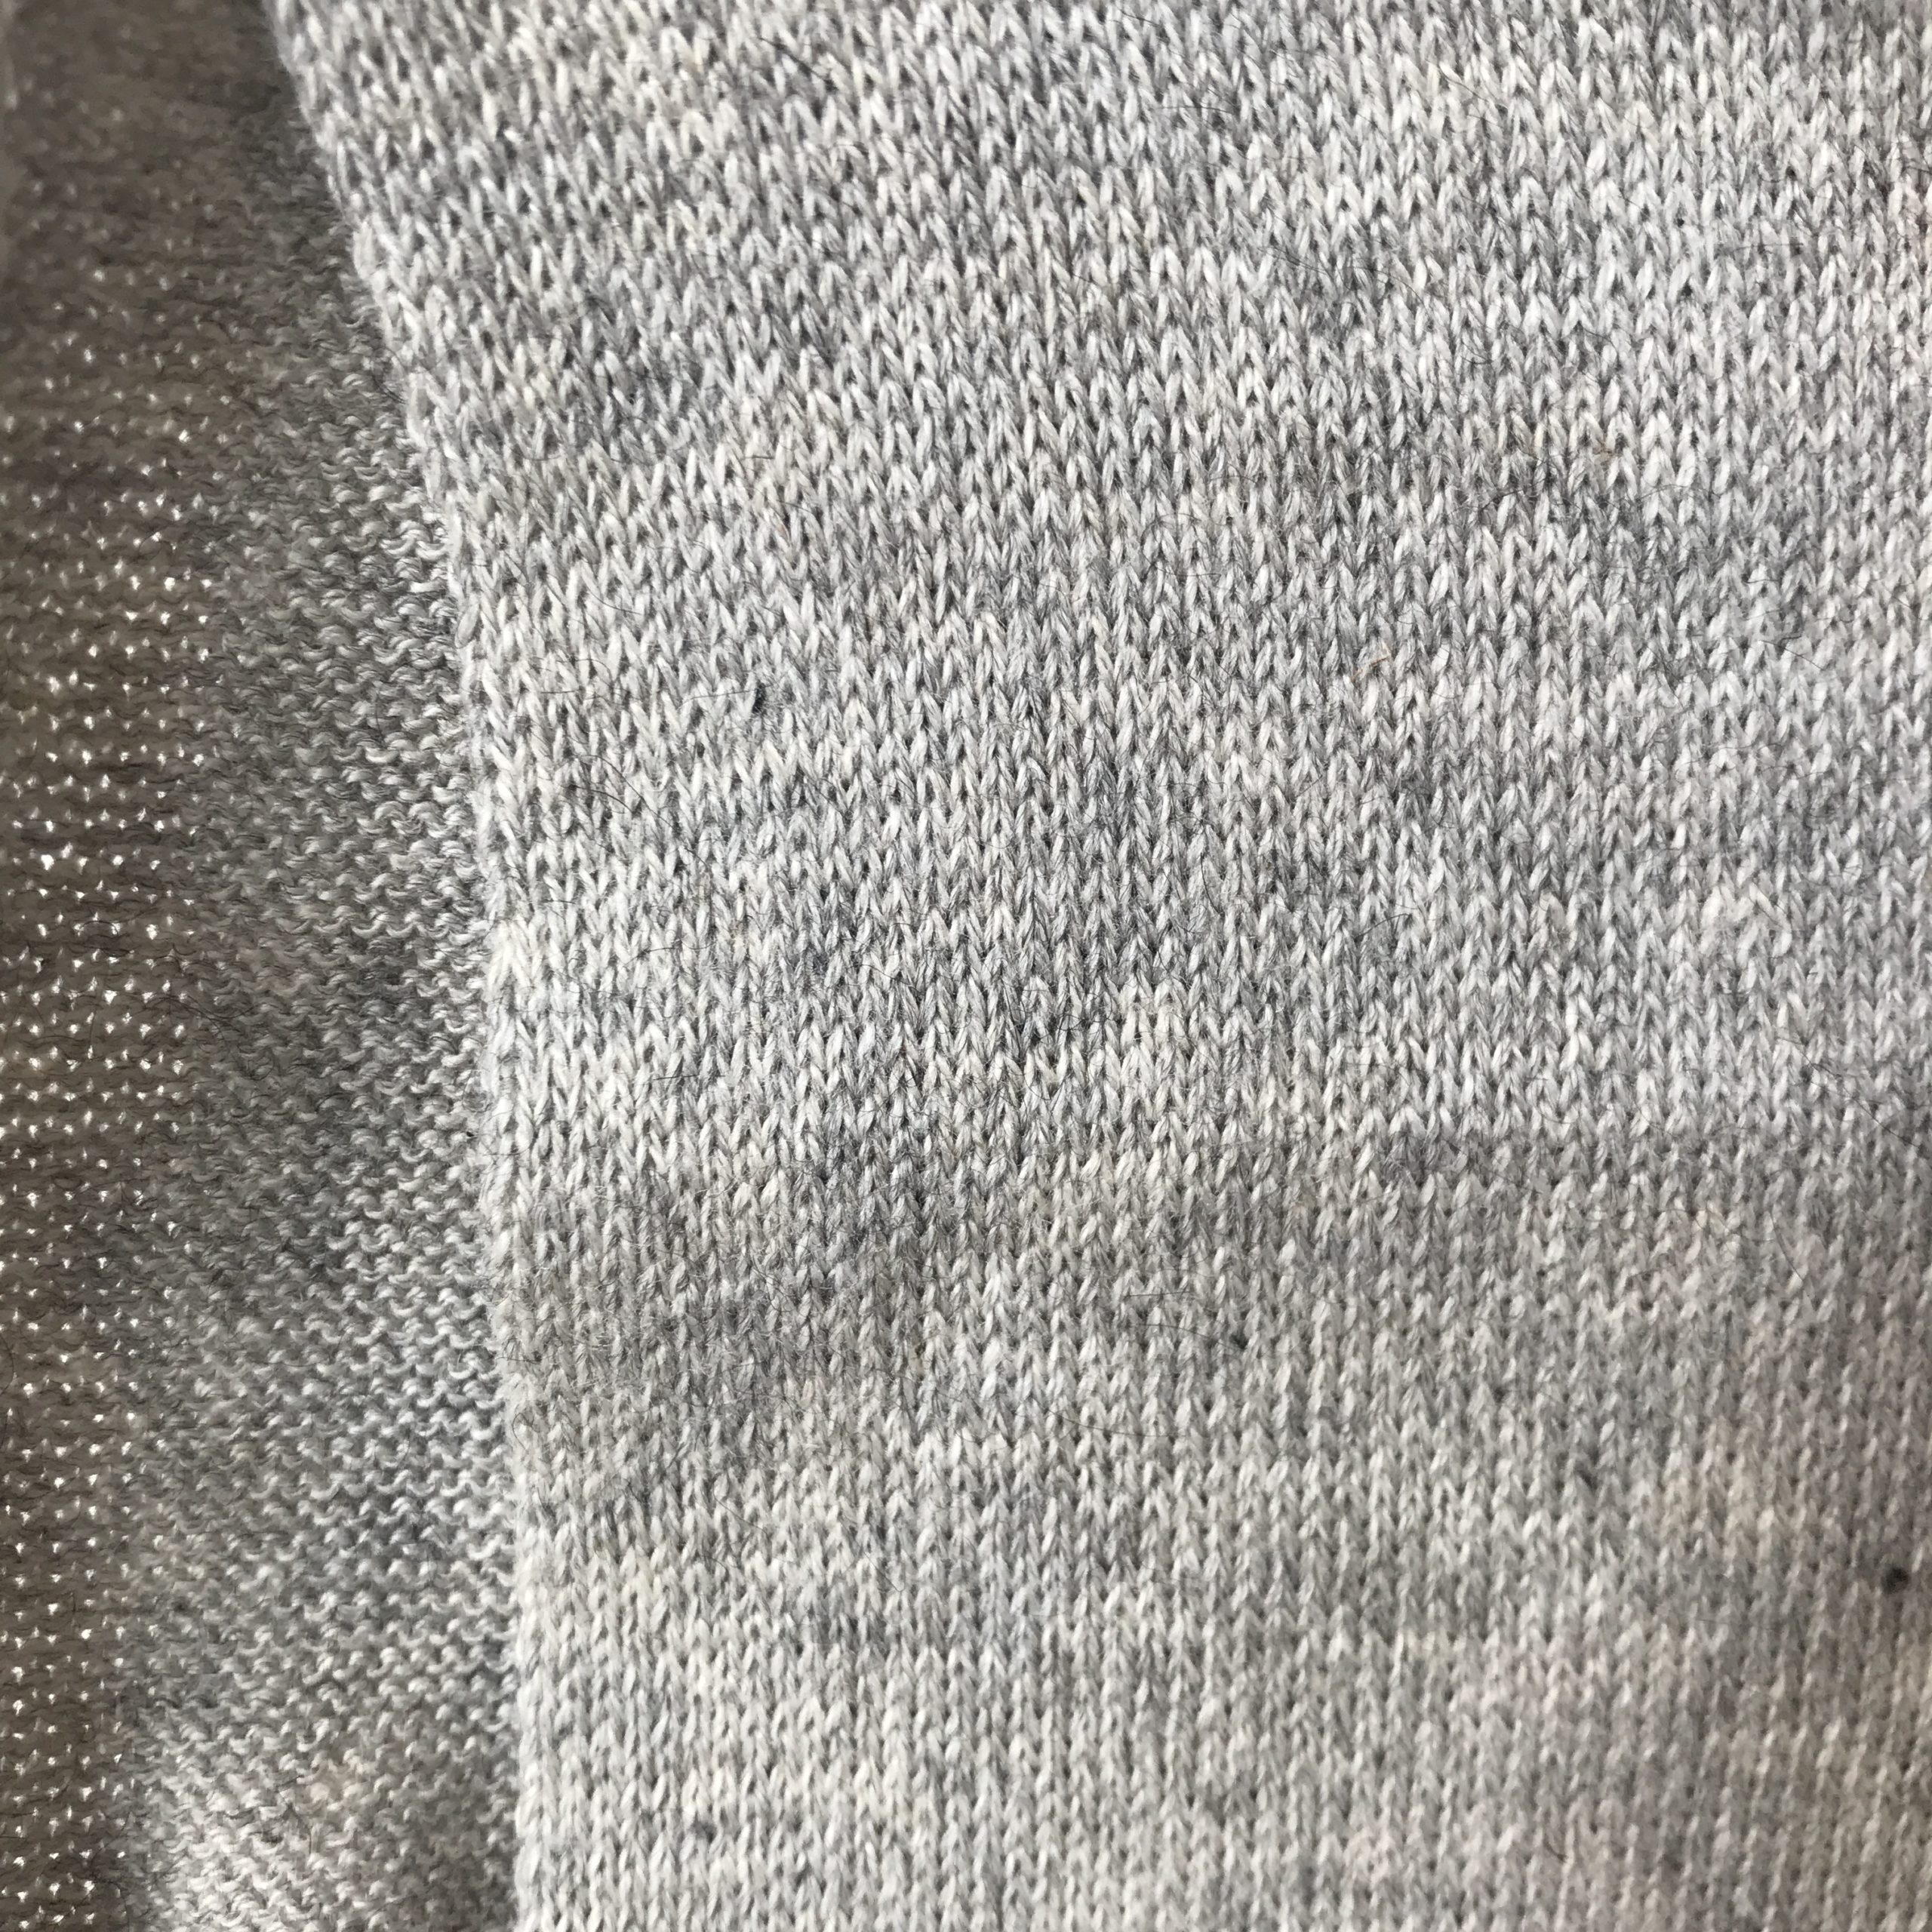 How to tell Knit from Woven fabrics?